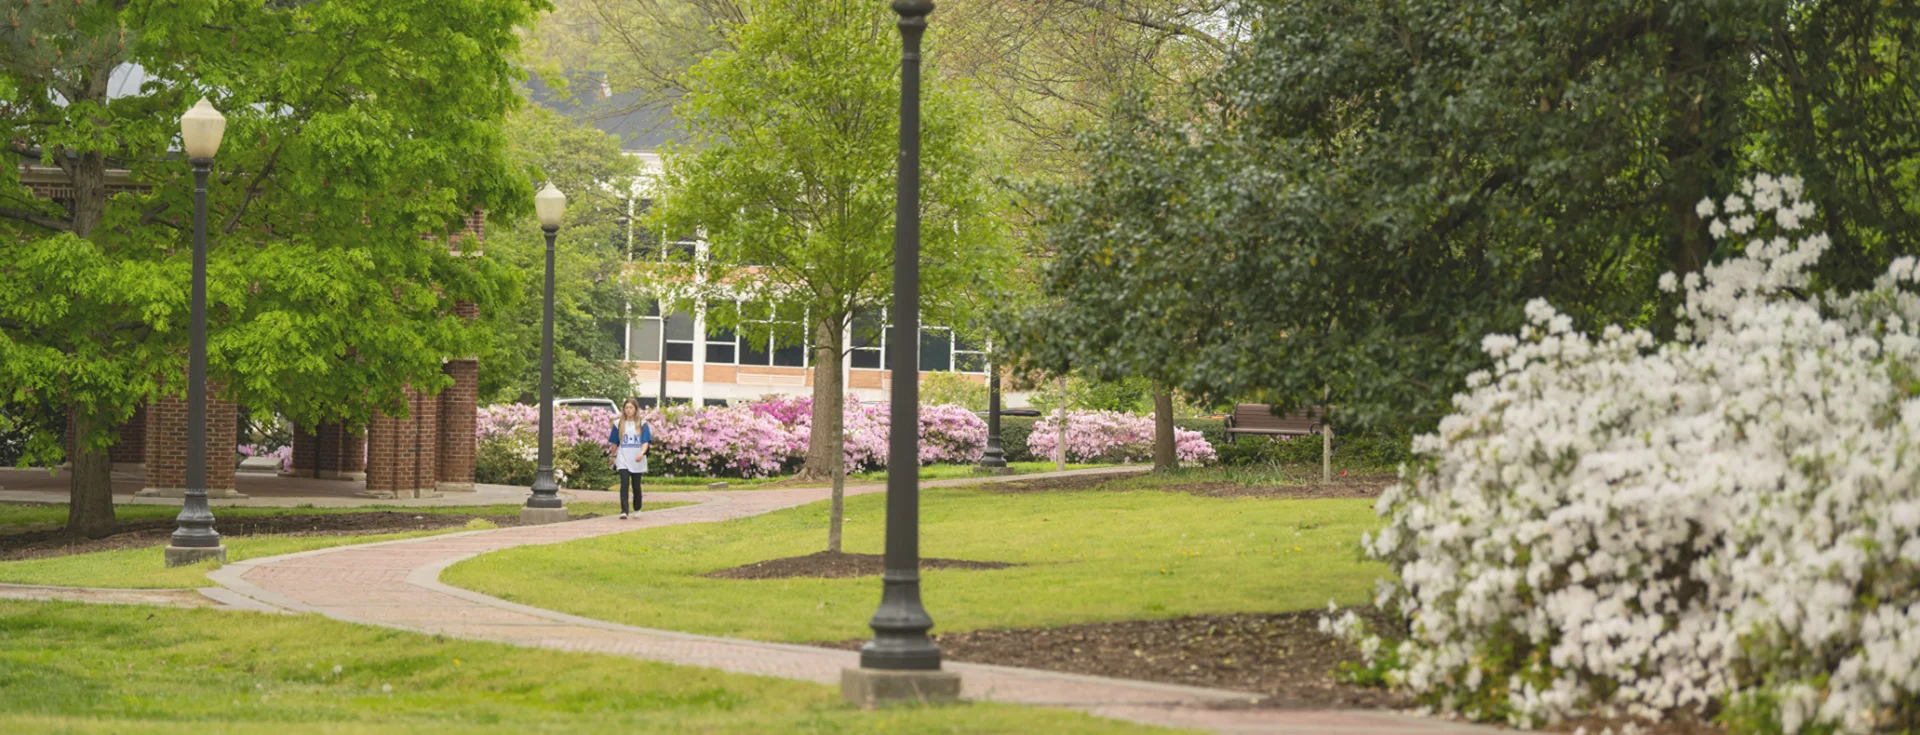  female student walks along a curved brick pathway surrounded by grass, green leafy trees and white and pink flowers.